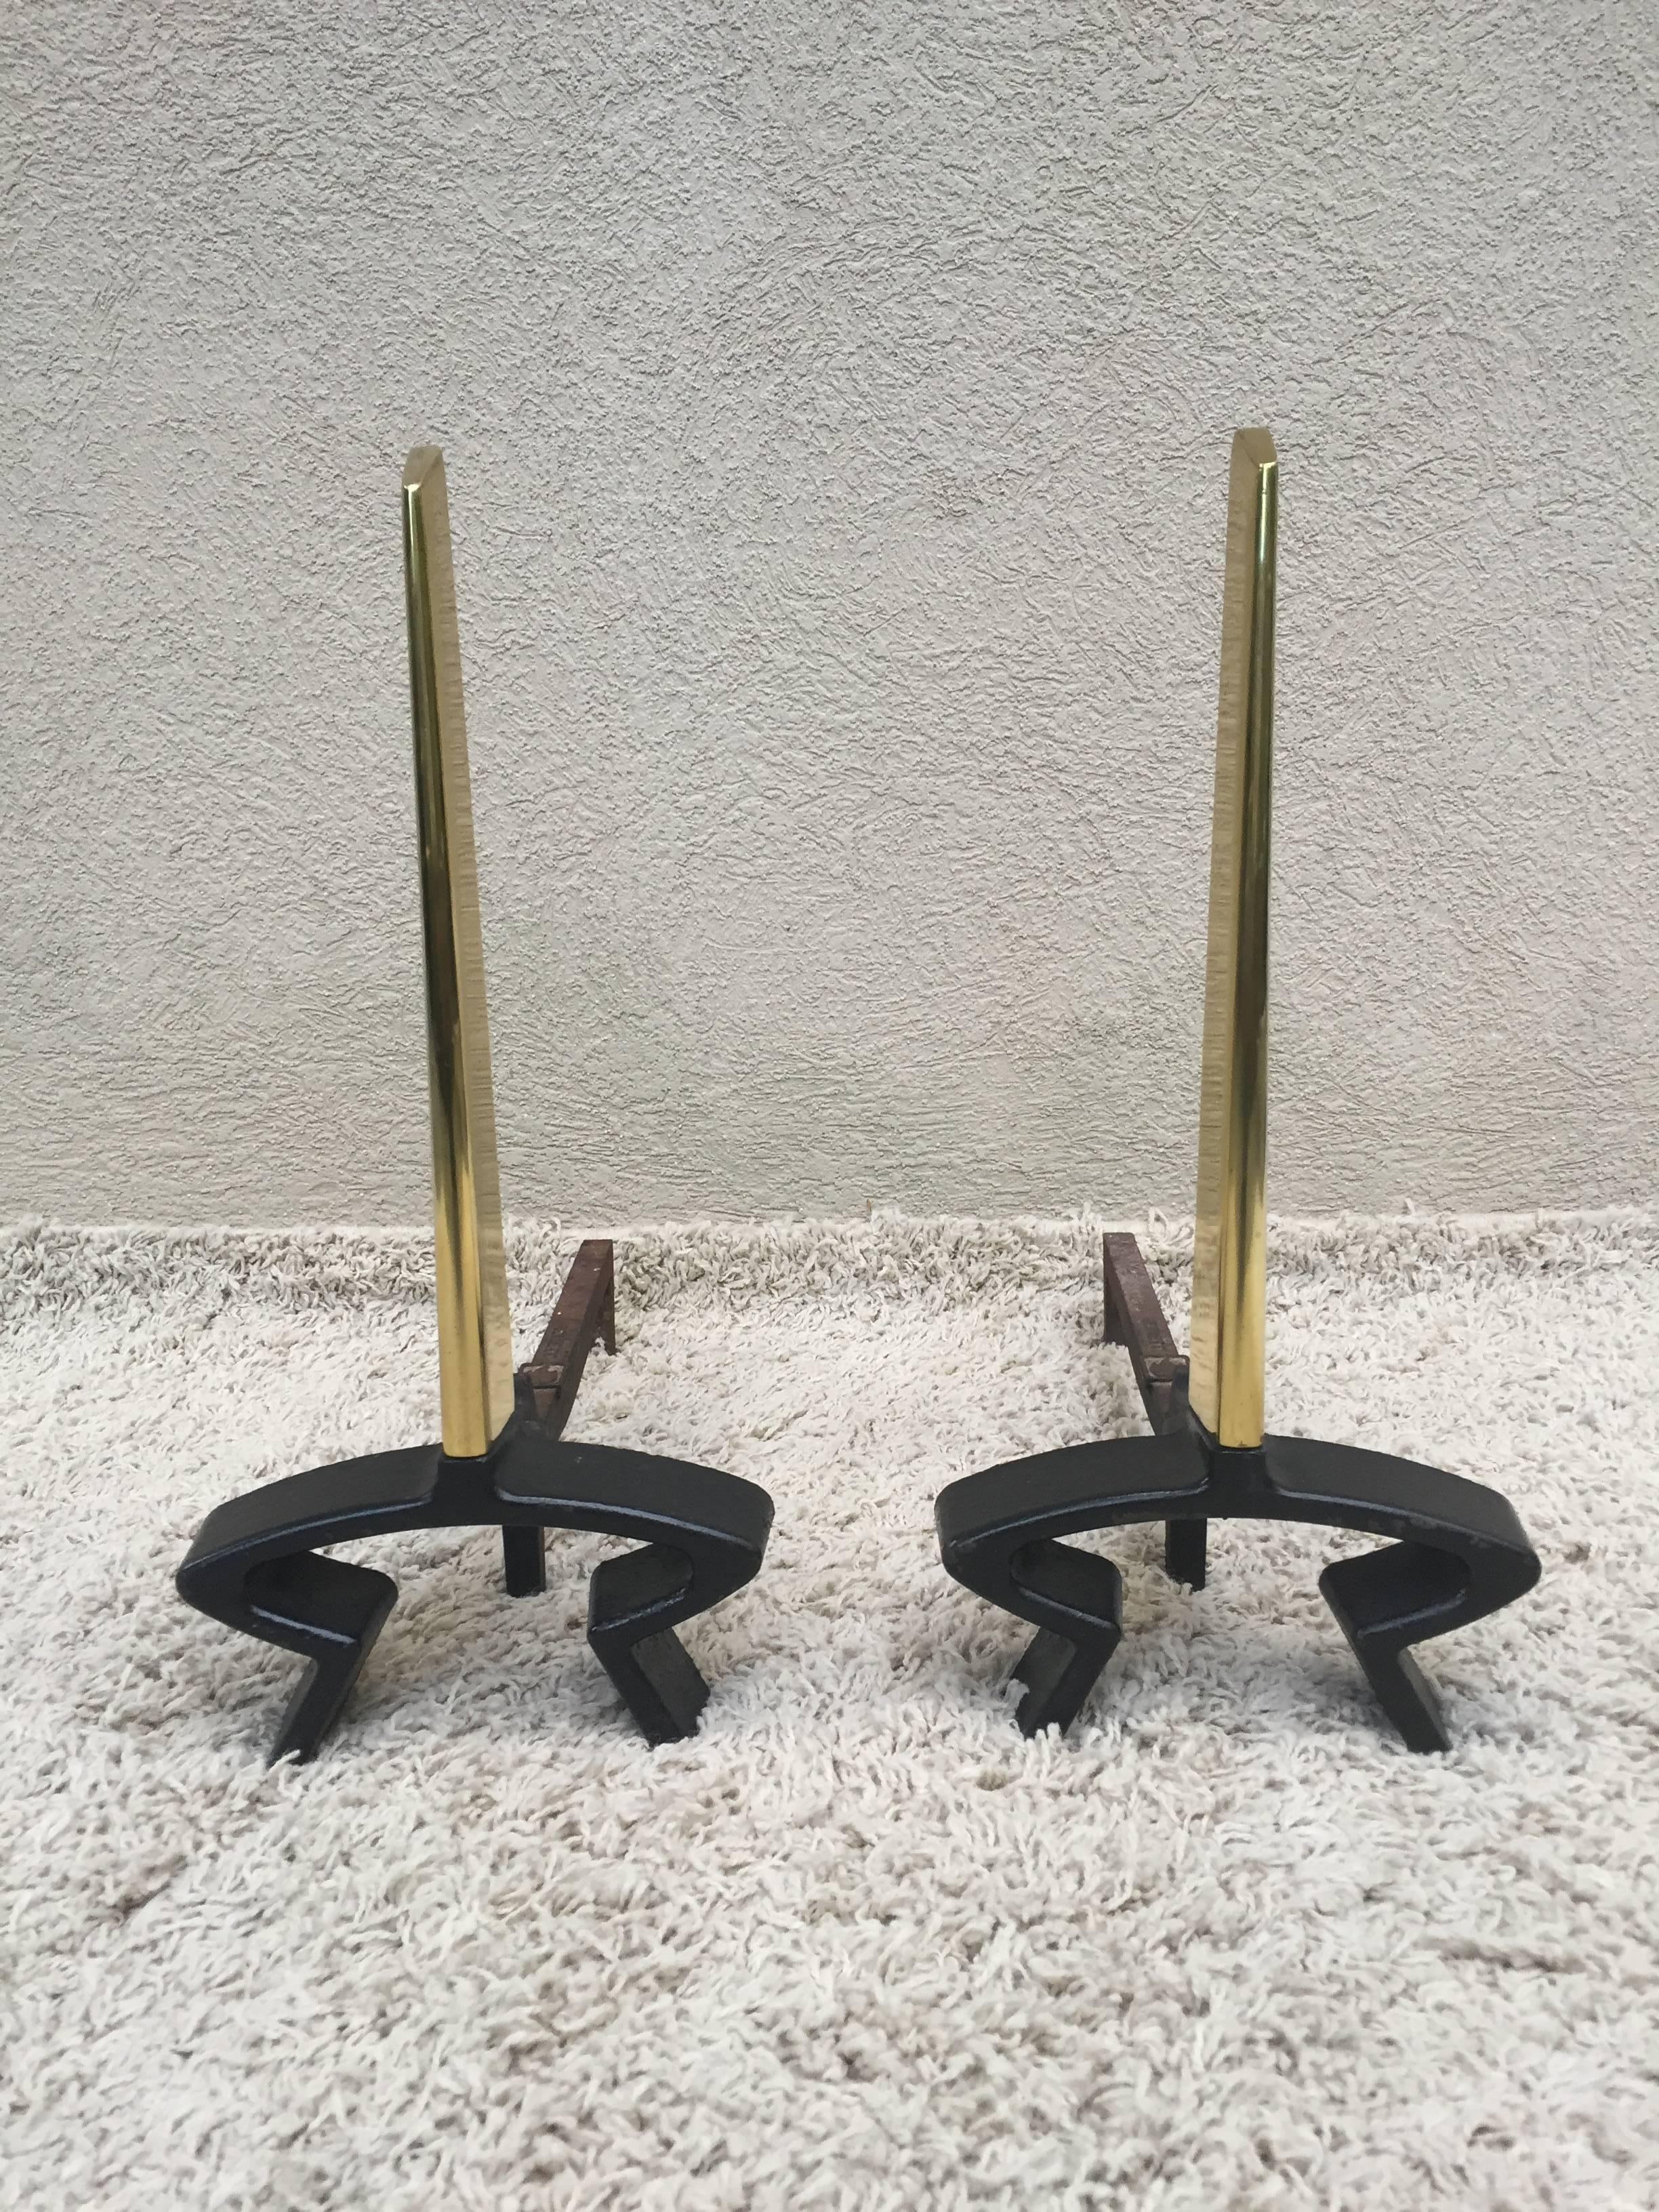 Donald Deskey Fireplace Andirons, Tool Utensils set Made By Bennet Co,Wrought iron and brass All original.

Measurements andirons 19